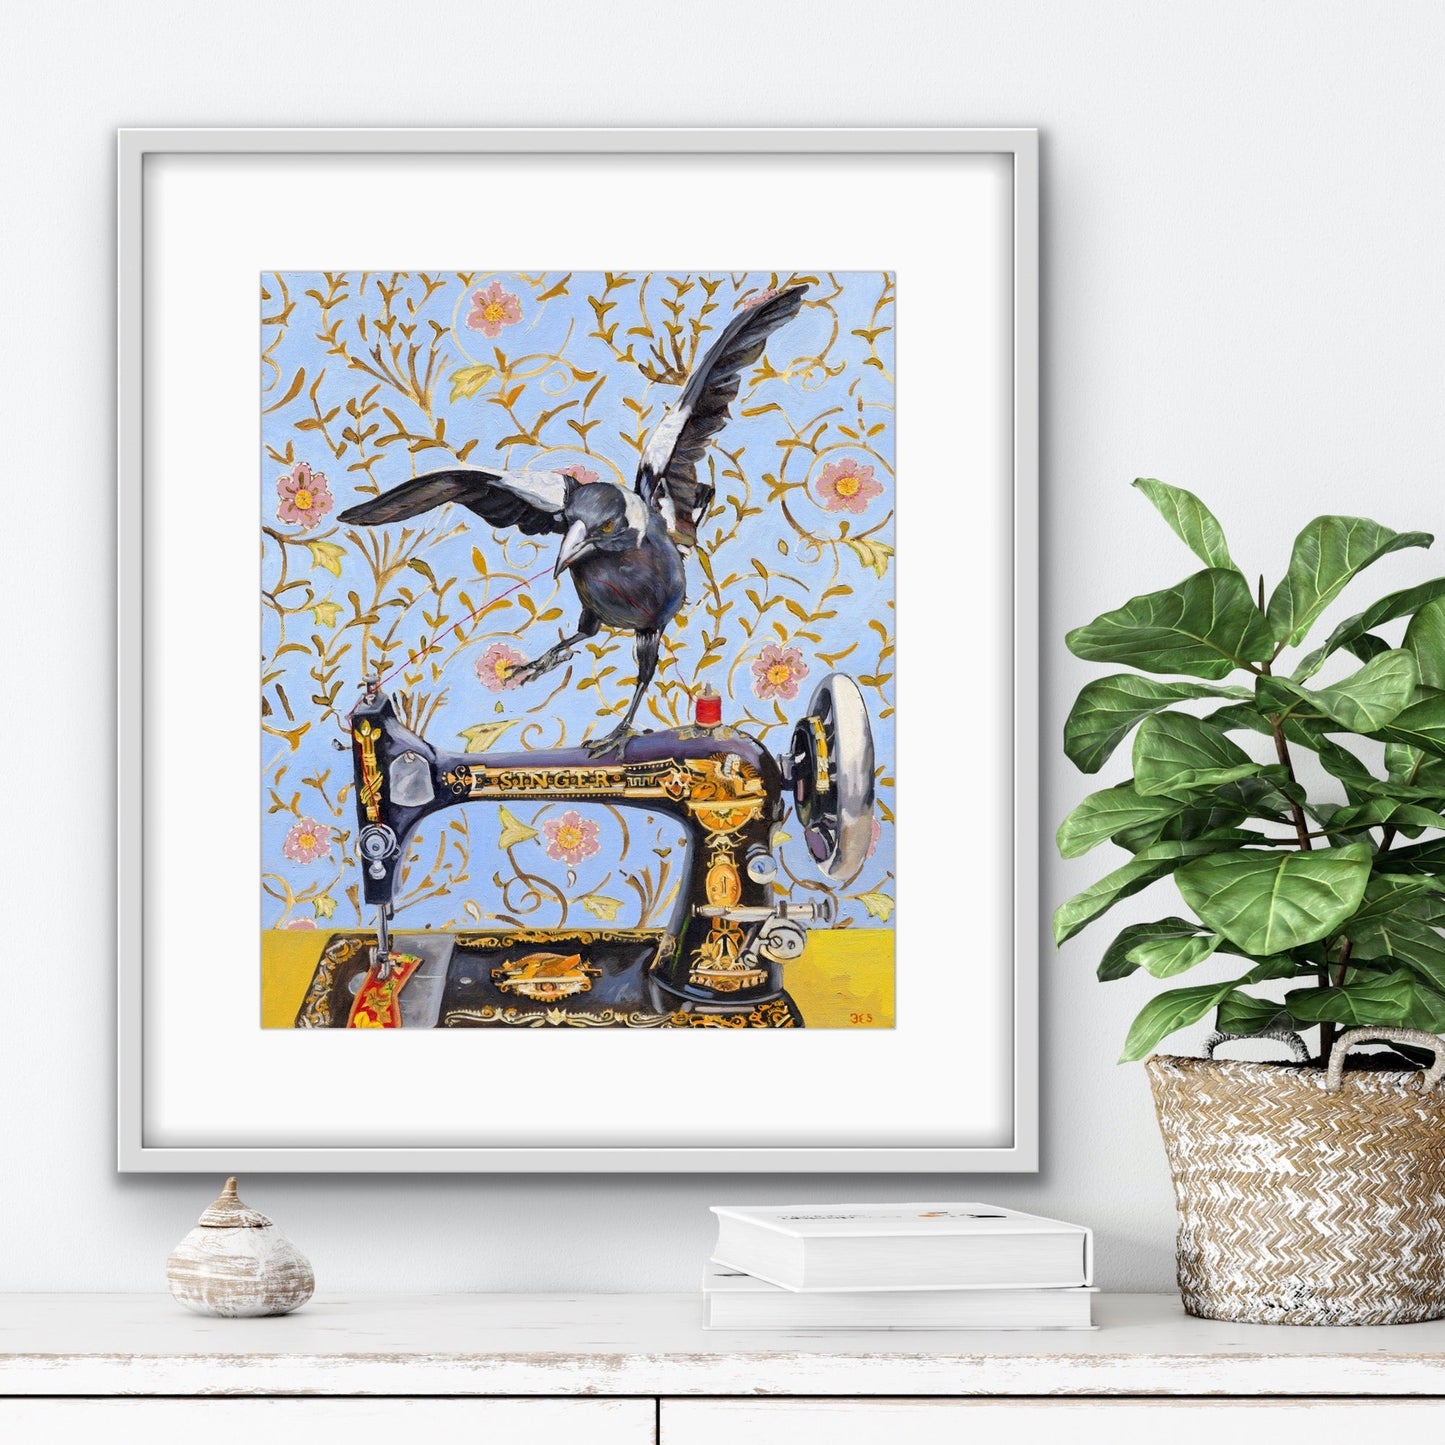 The singer and the songbird limited edition fine art print - Fiona Smith Art & Writing